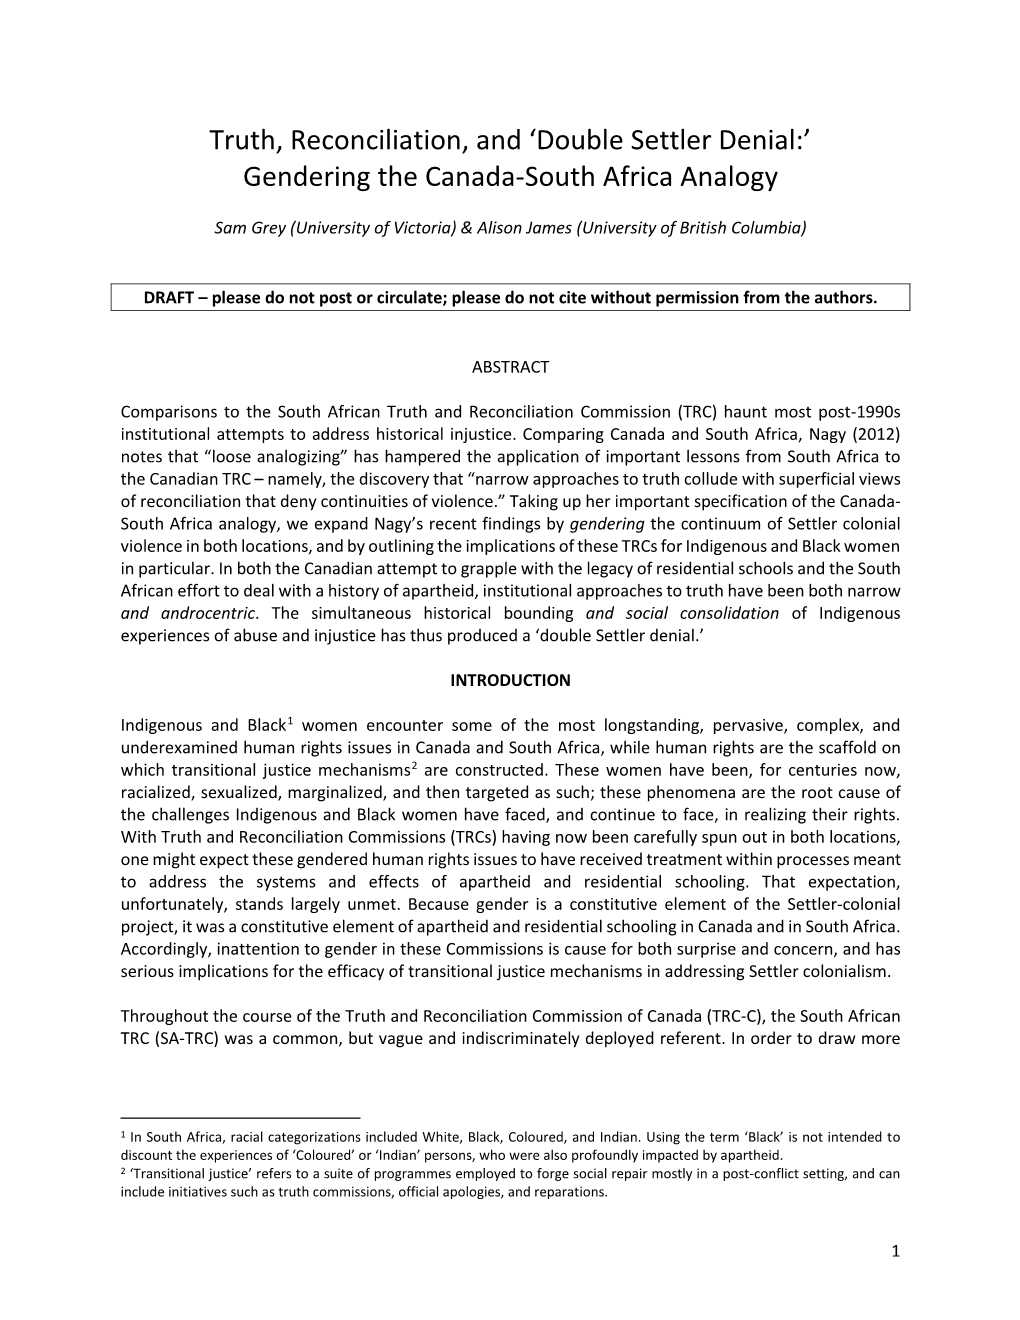 'Double Settler Denial:' Gendering the Canada-South Africa Analogy